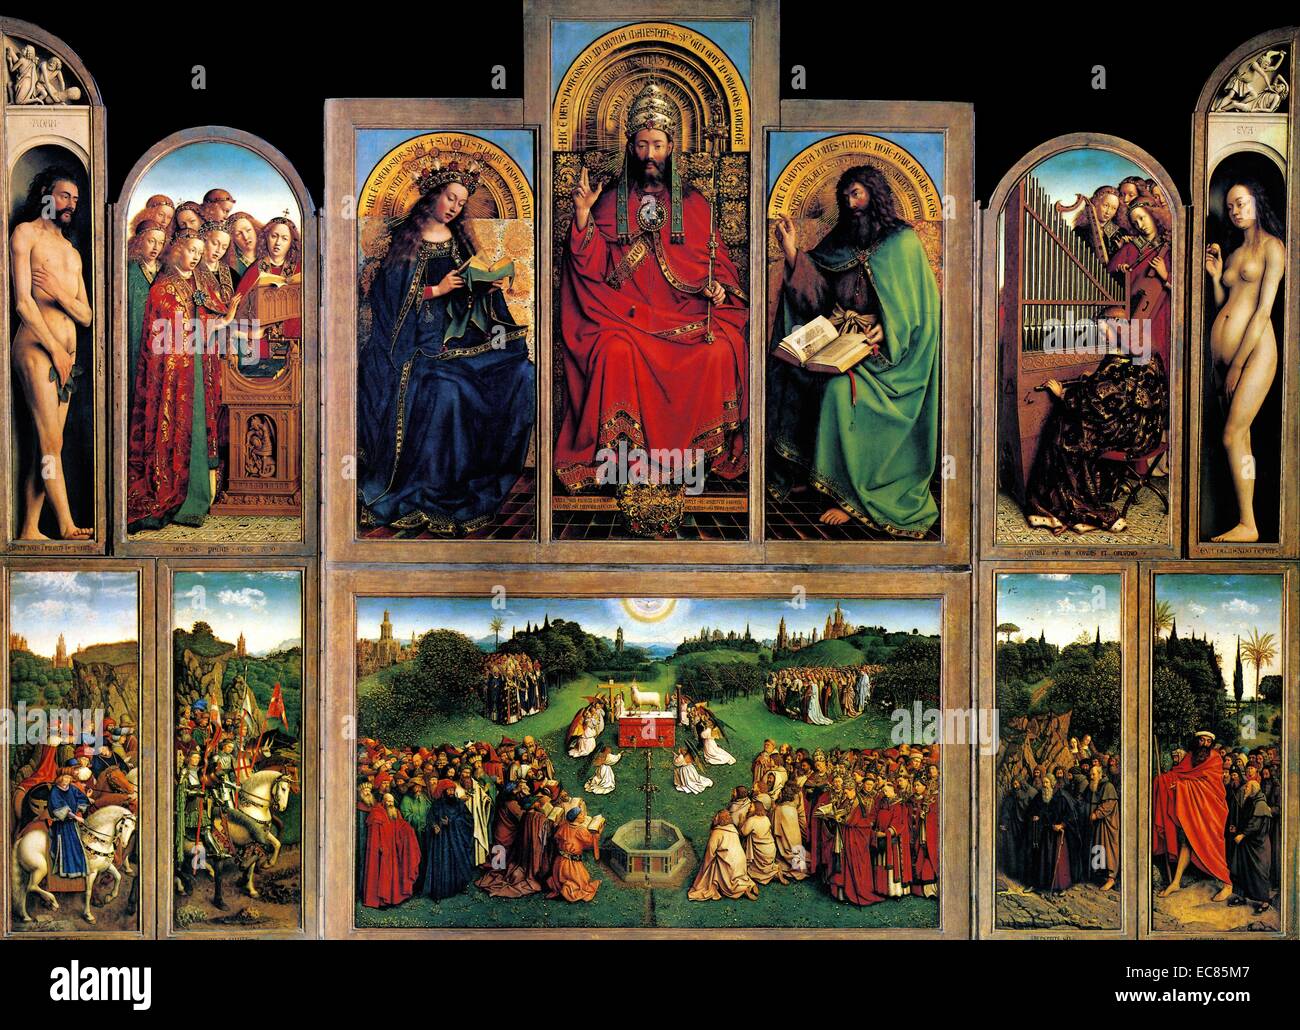 The Ghent Altarpiece, Open, dated 1430. Created by Jan van Eyck (1395-1441), early Flemish polyptych panel painting. Dated 15th century. Stock Photo